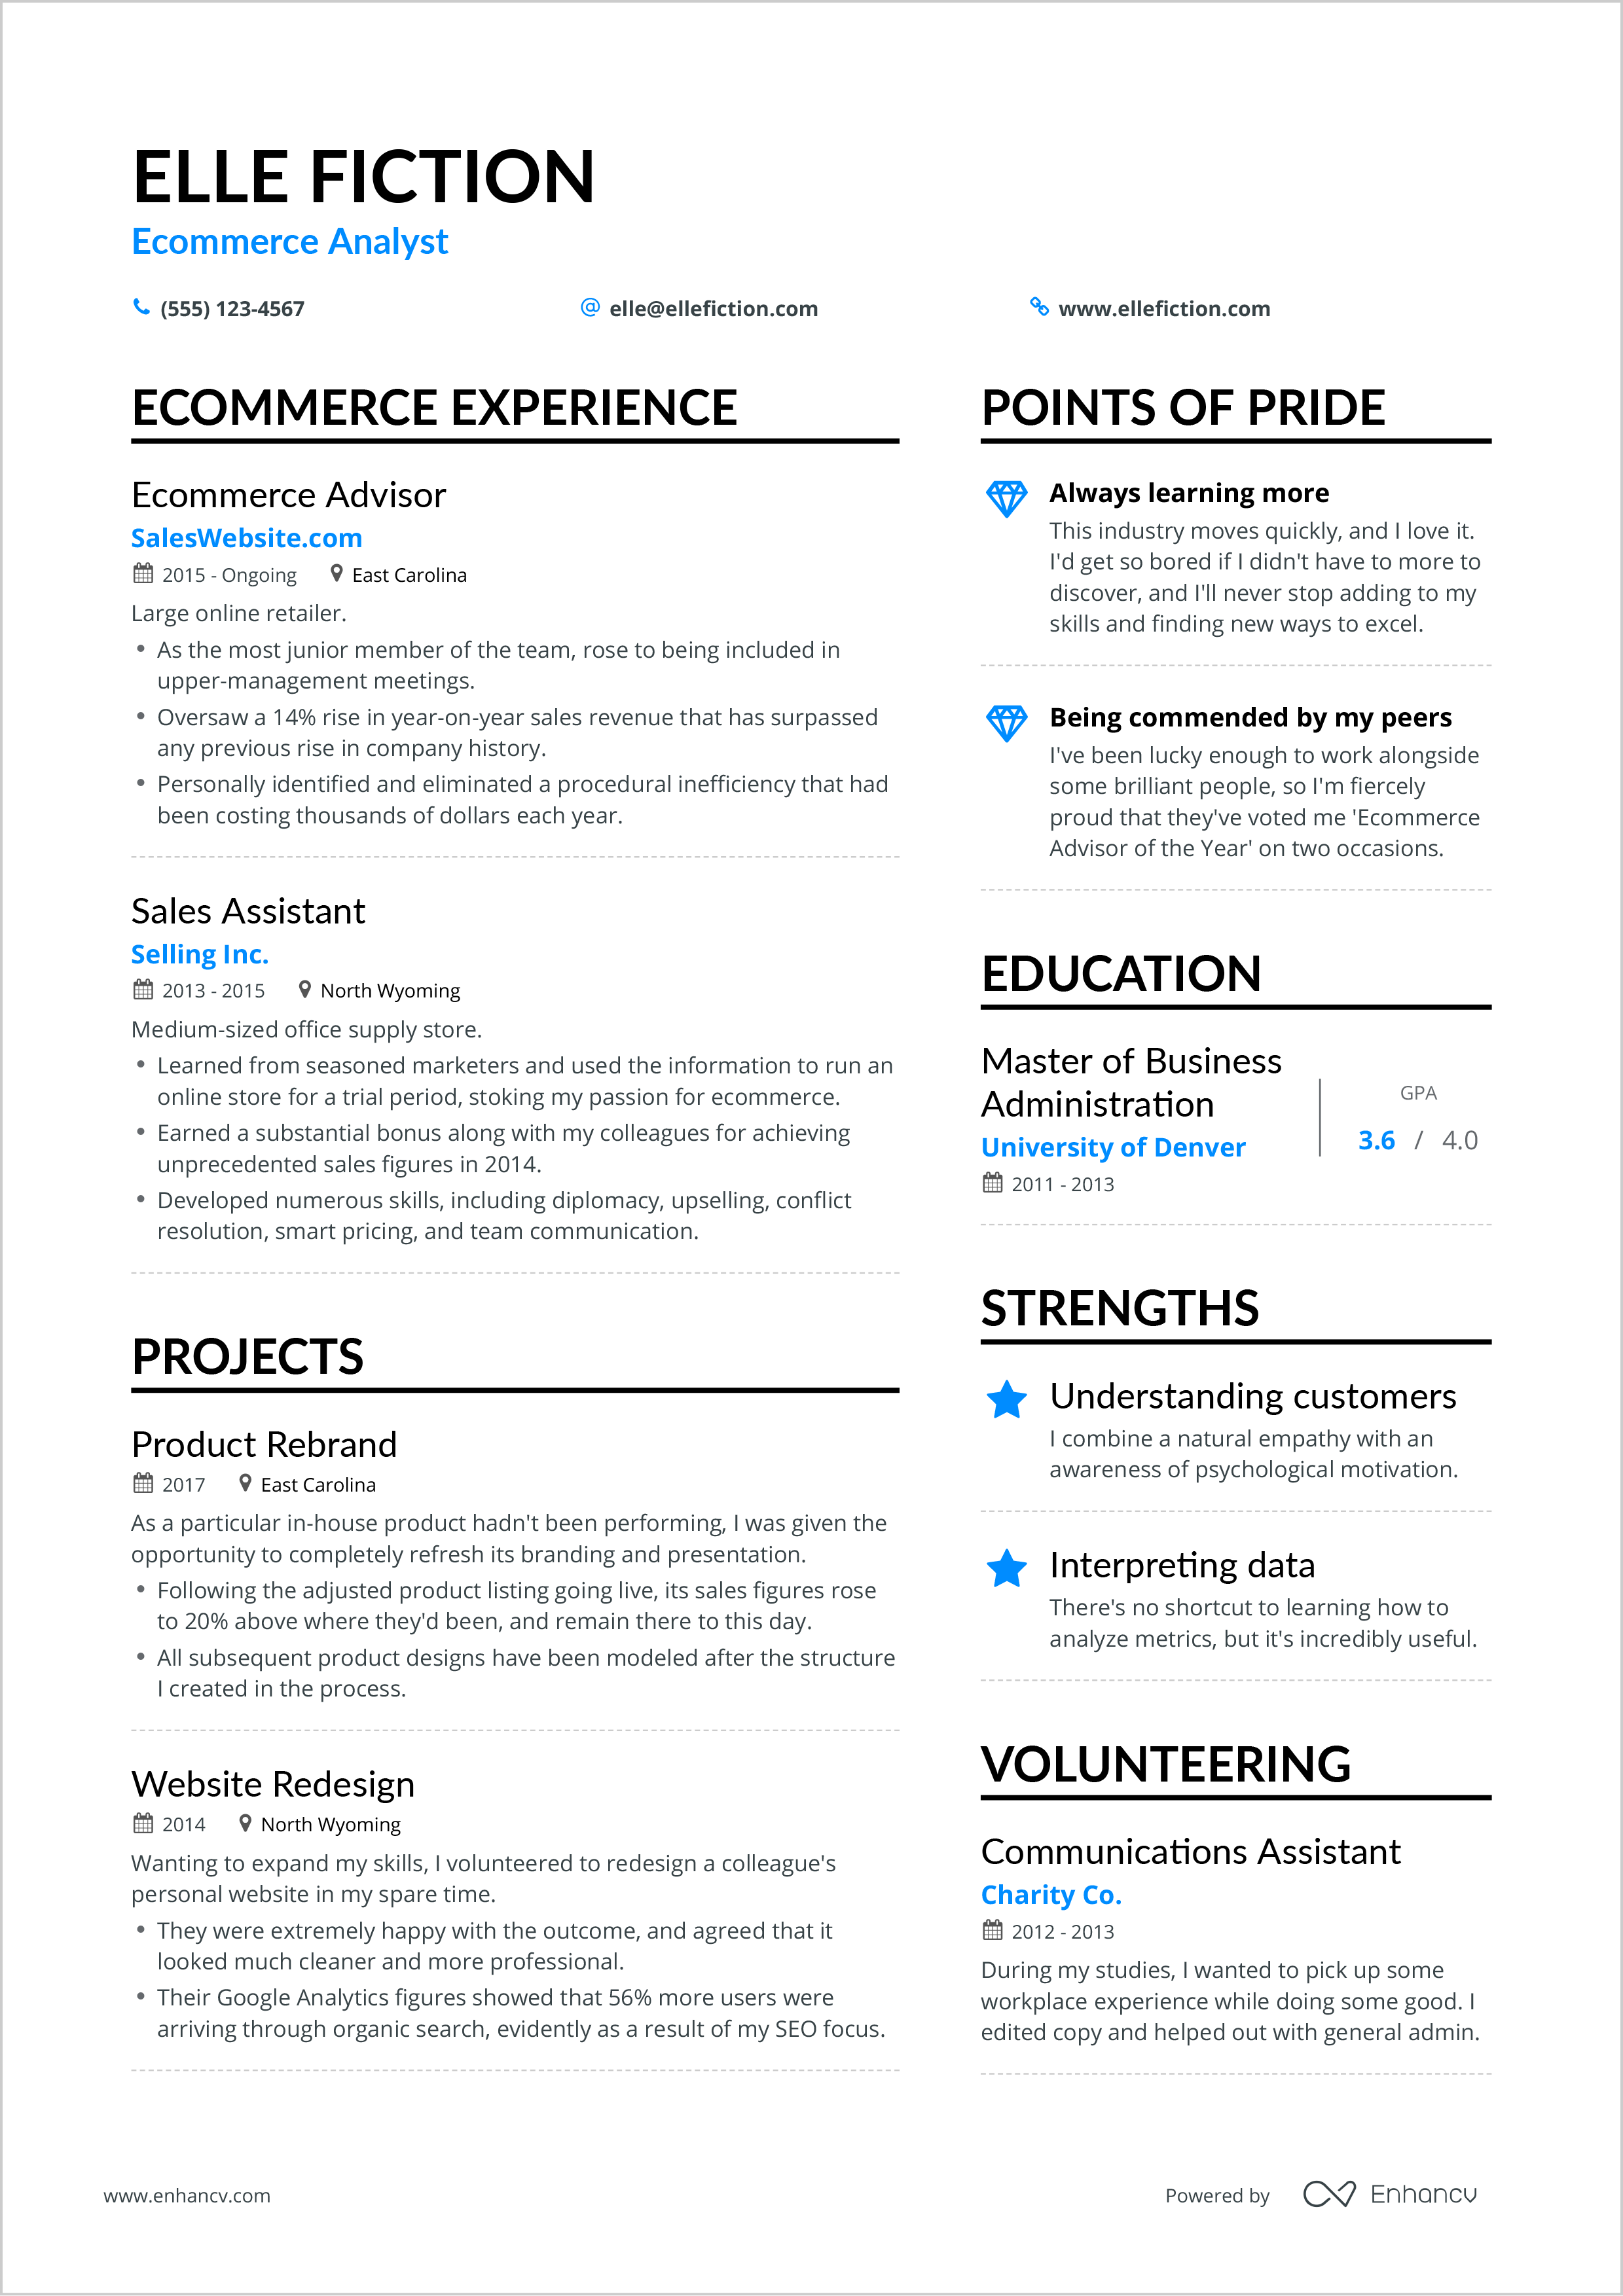 How To Put Etsy Shop On Resume